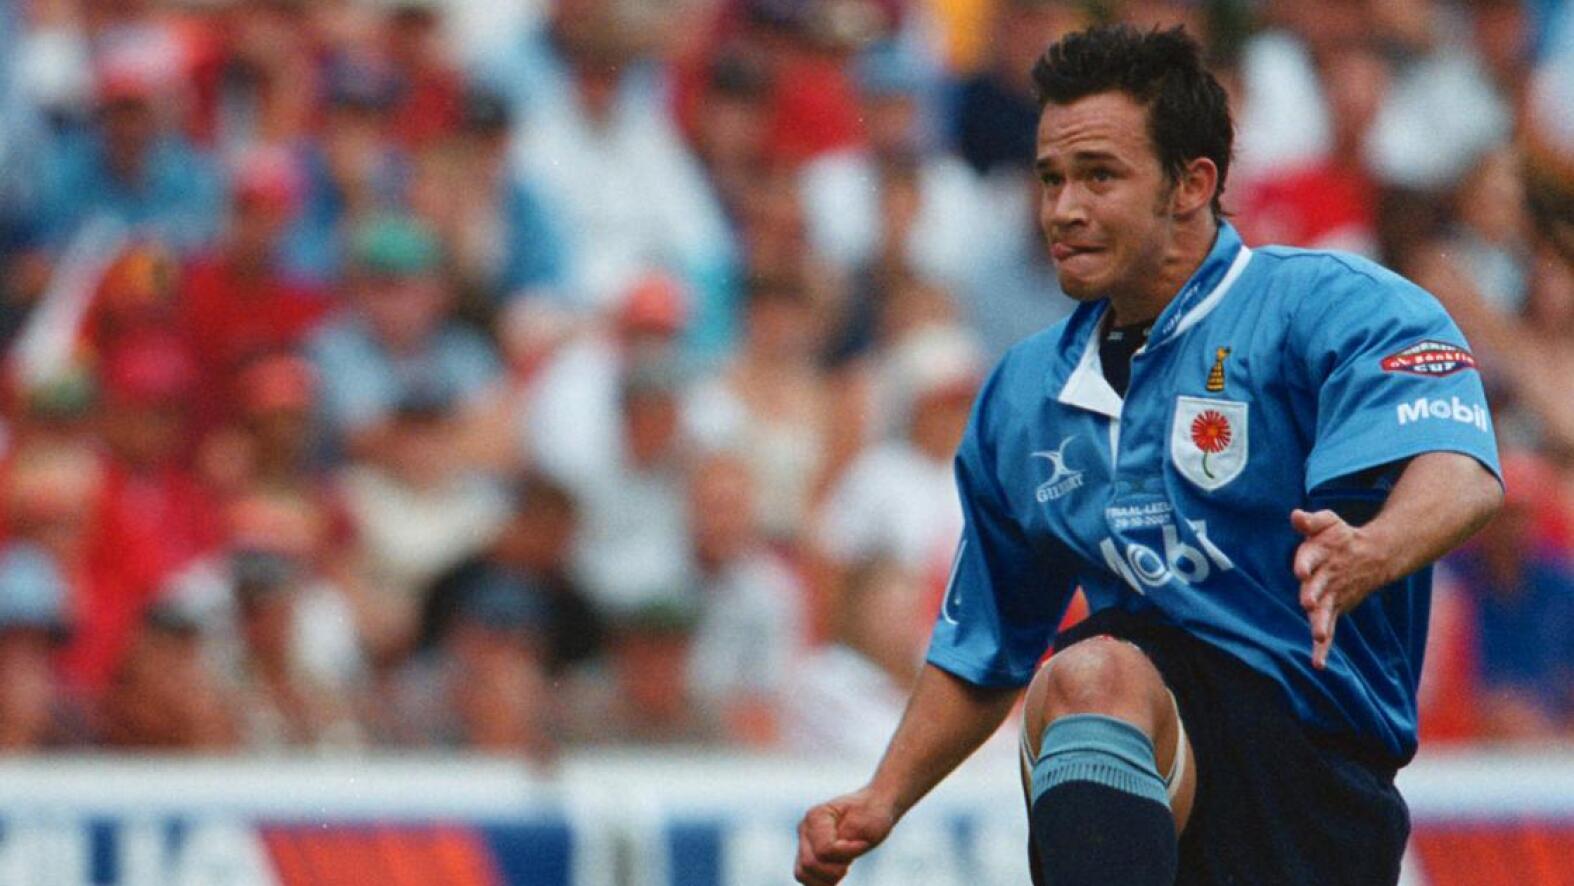 Former Springbok flyhalf Derick Hougaard during his playing days for the Blue Bulls